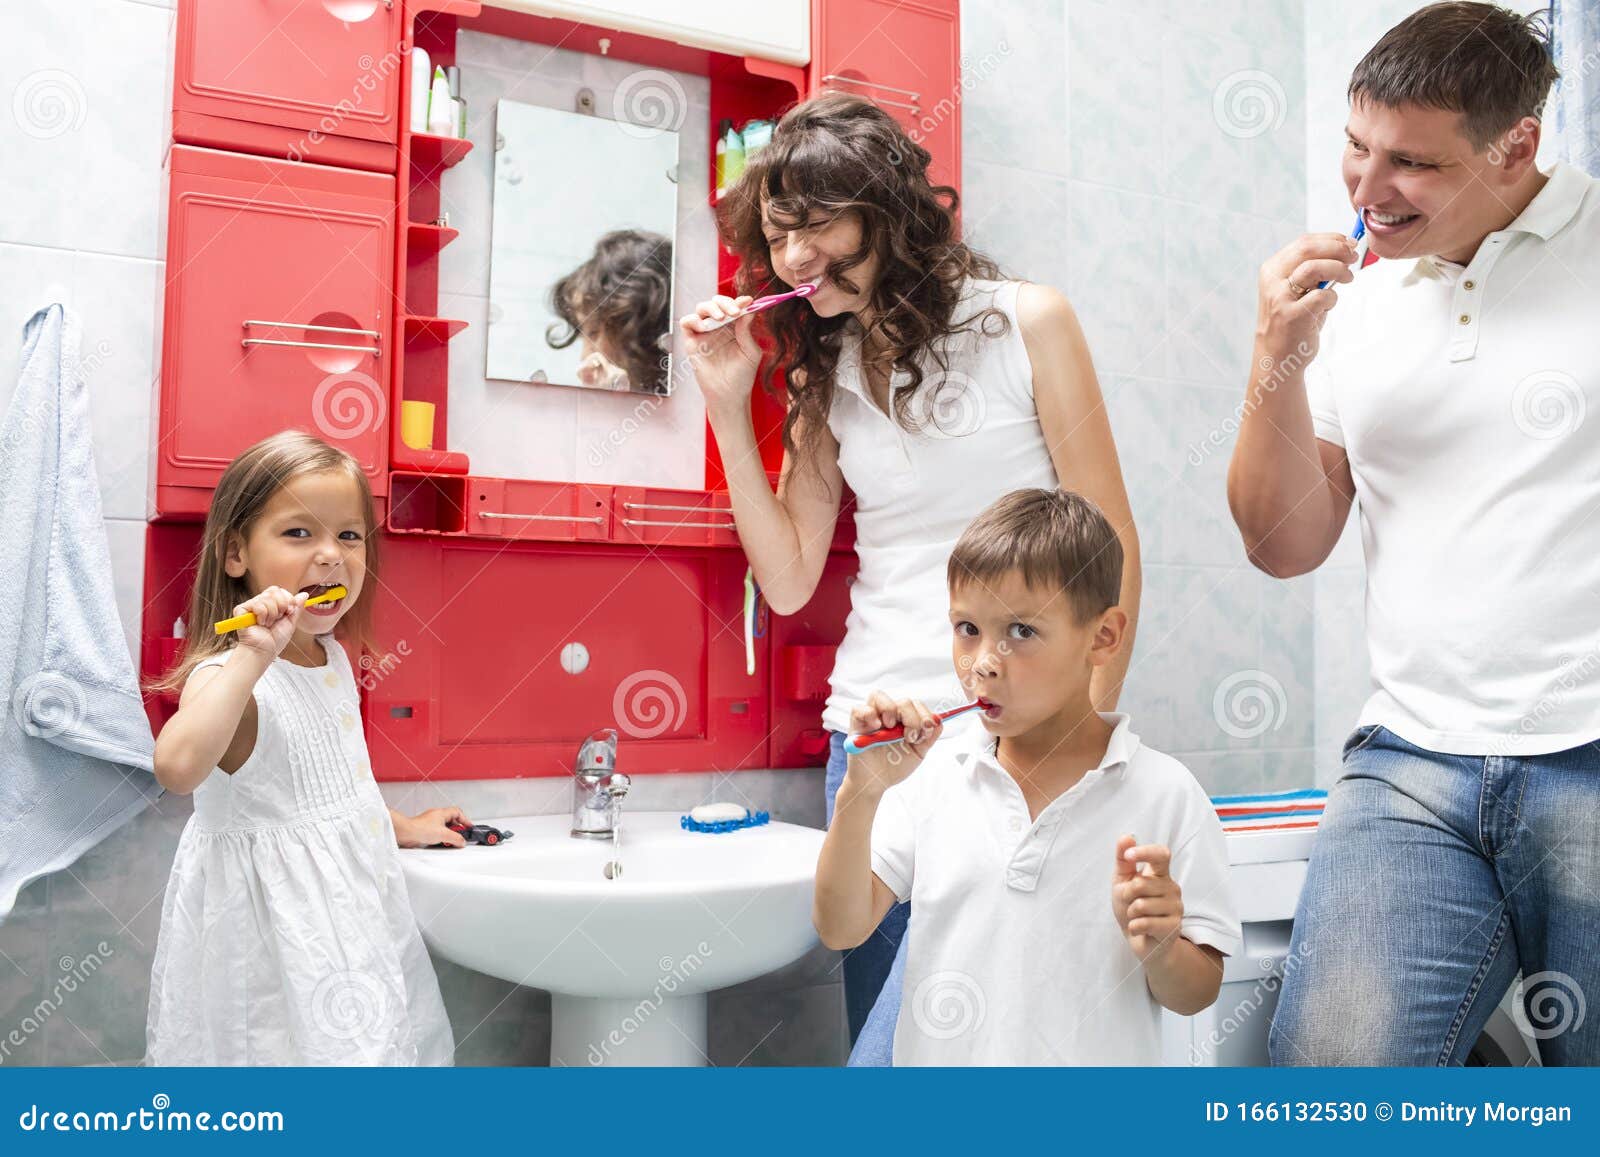 family . young caucasian family with the kids having fun in bathroom while brushing teeth together